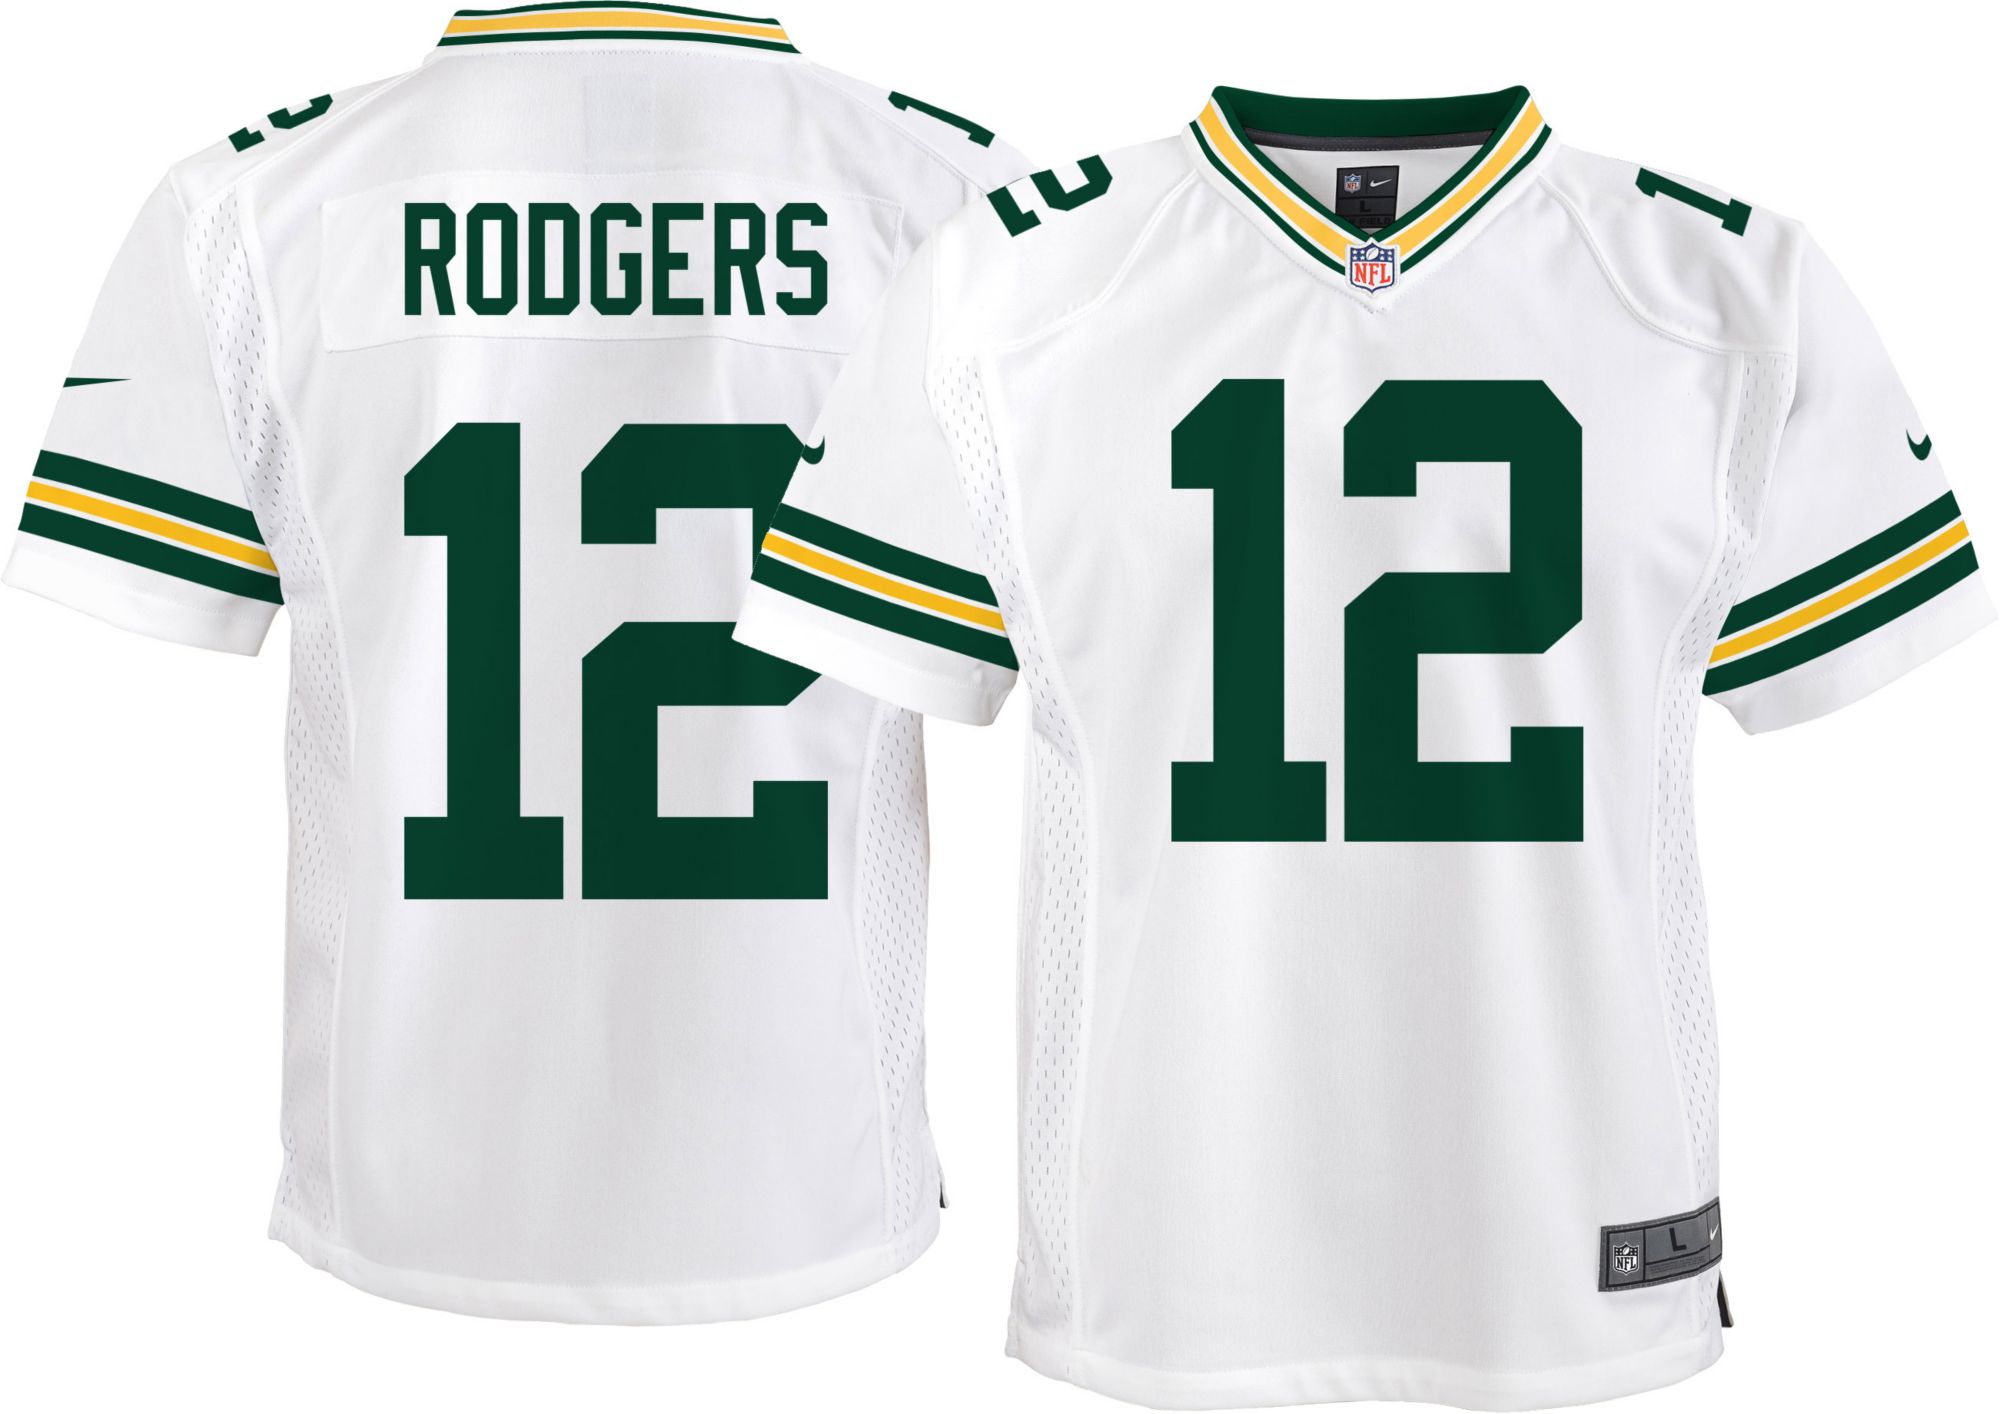 aaron rodgers jersey youth medium